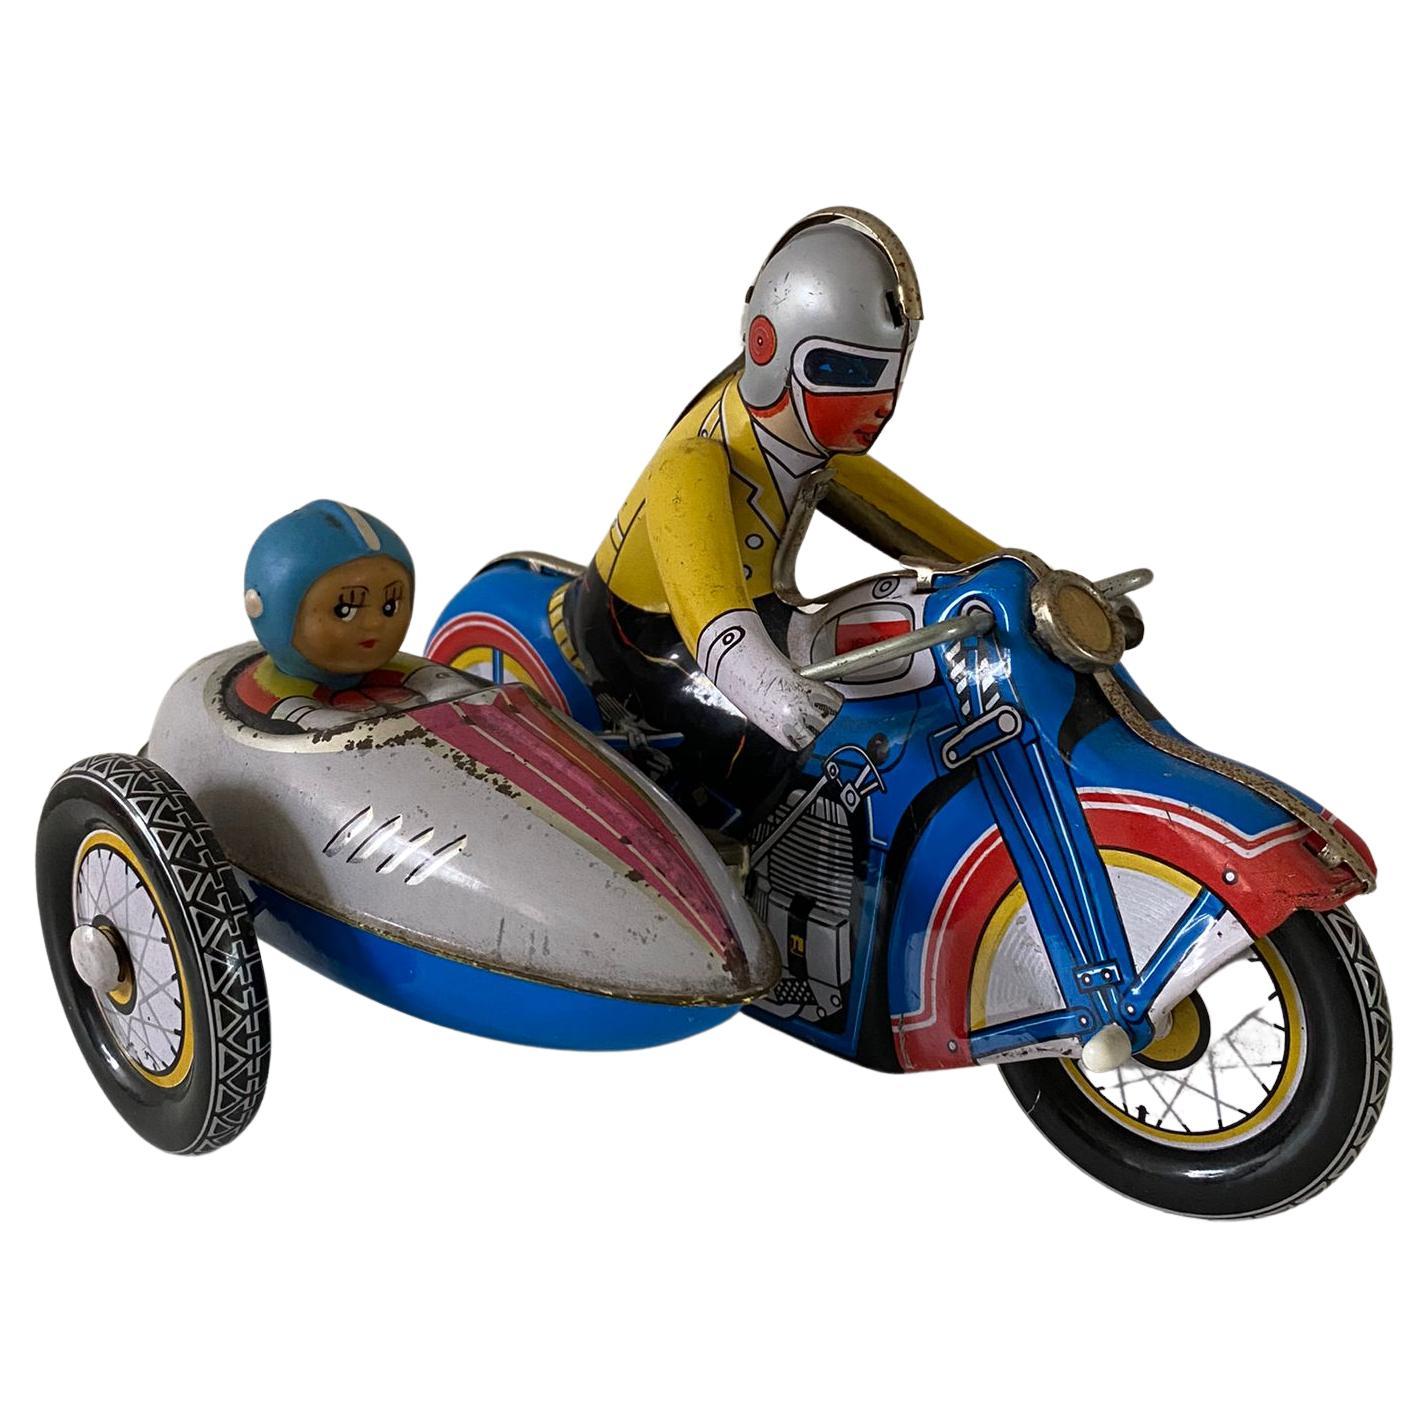 Vintage Wind-Up Tin Toy Motorcycle with Co-Driver and Key For Sale